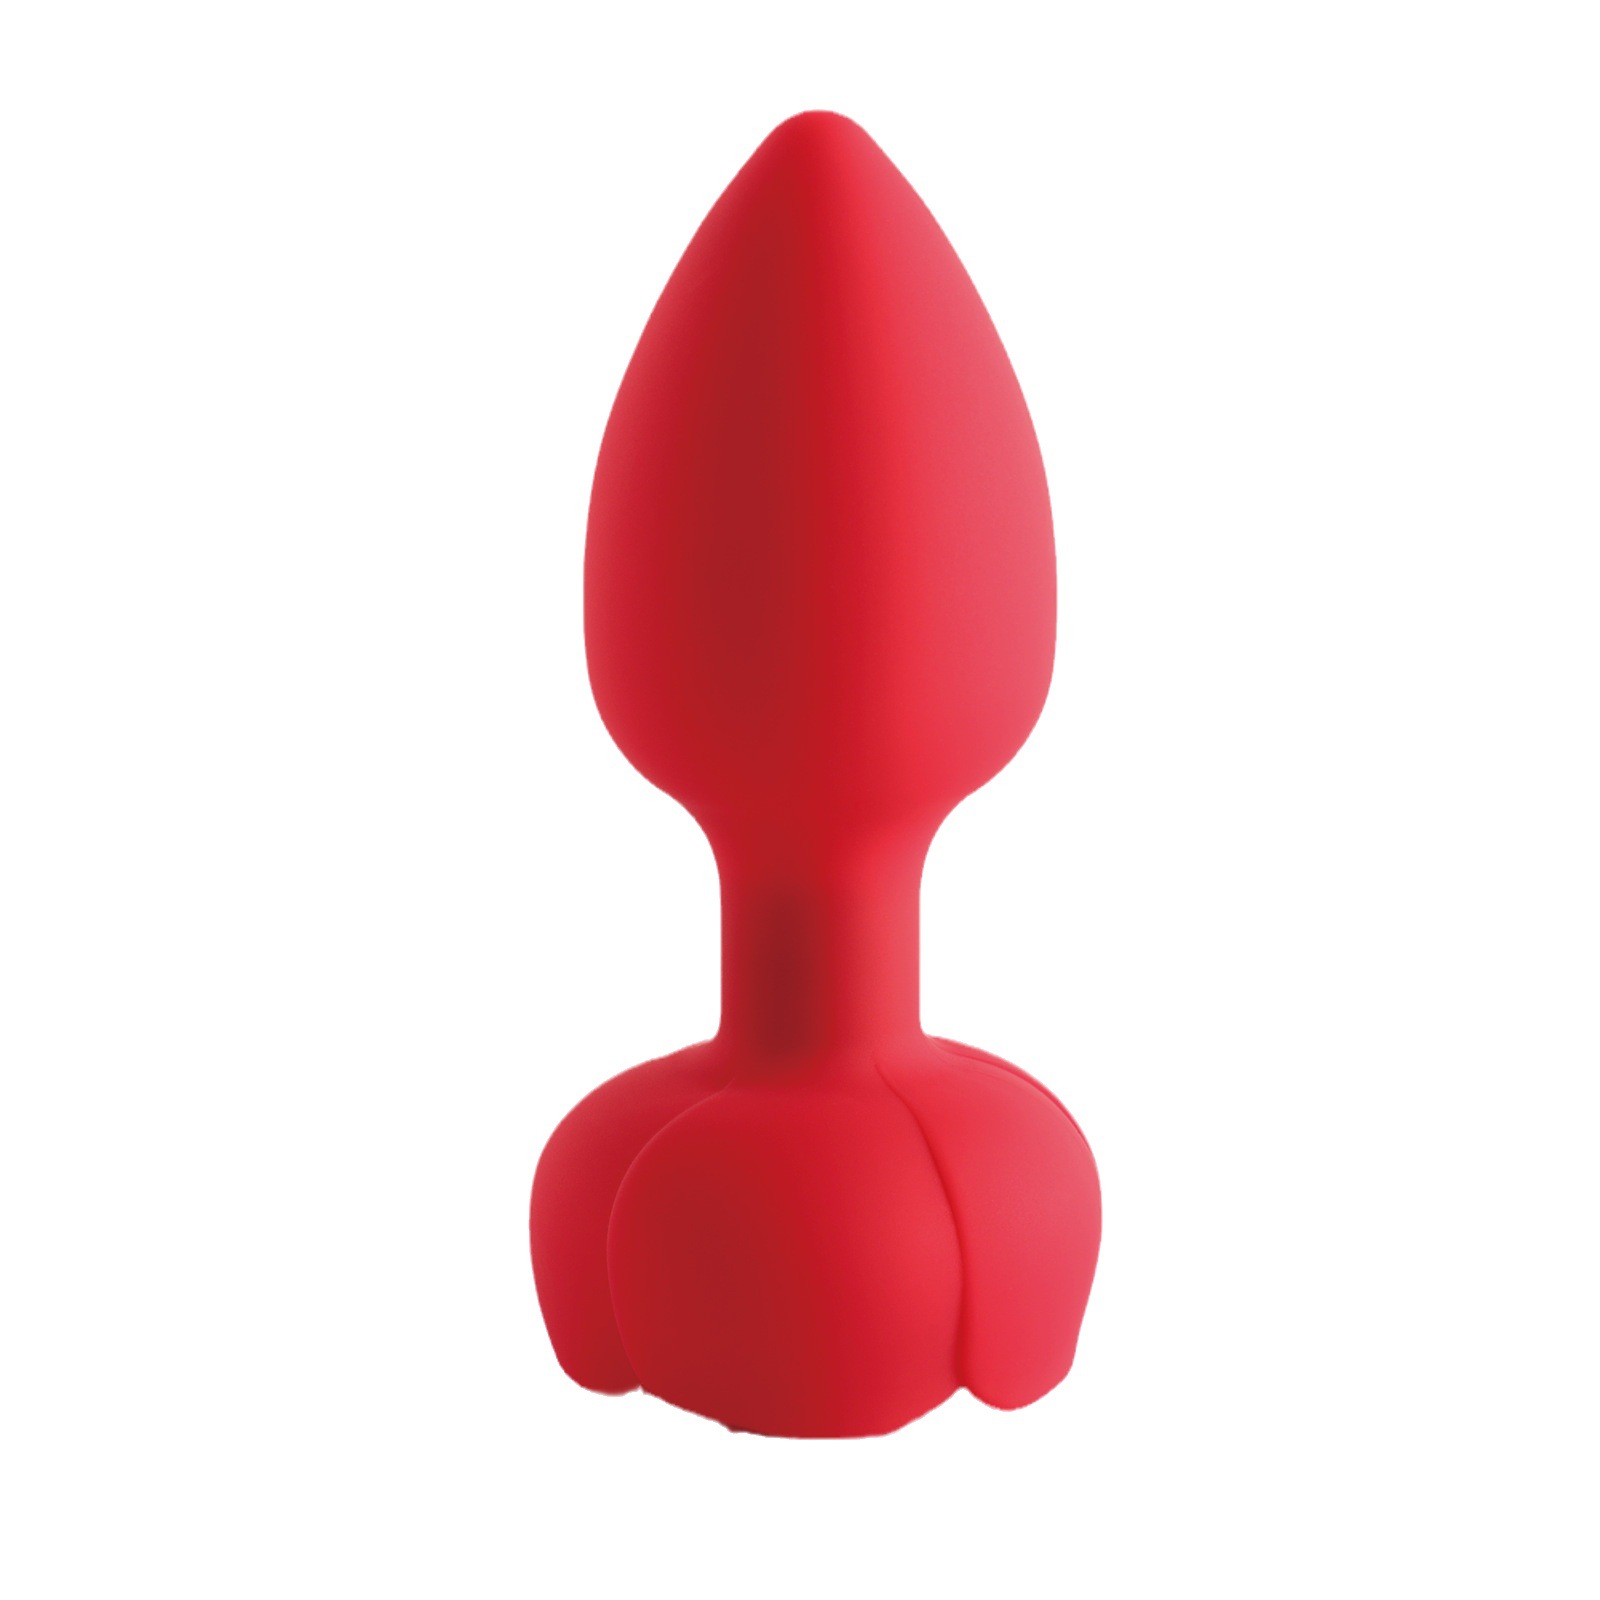 8.Red--Colorful glowing Adult Sex Toys